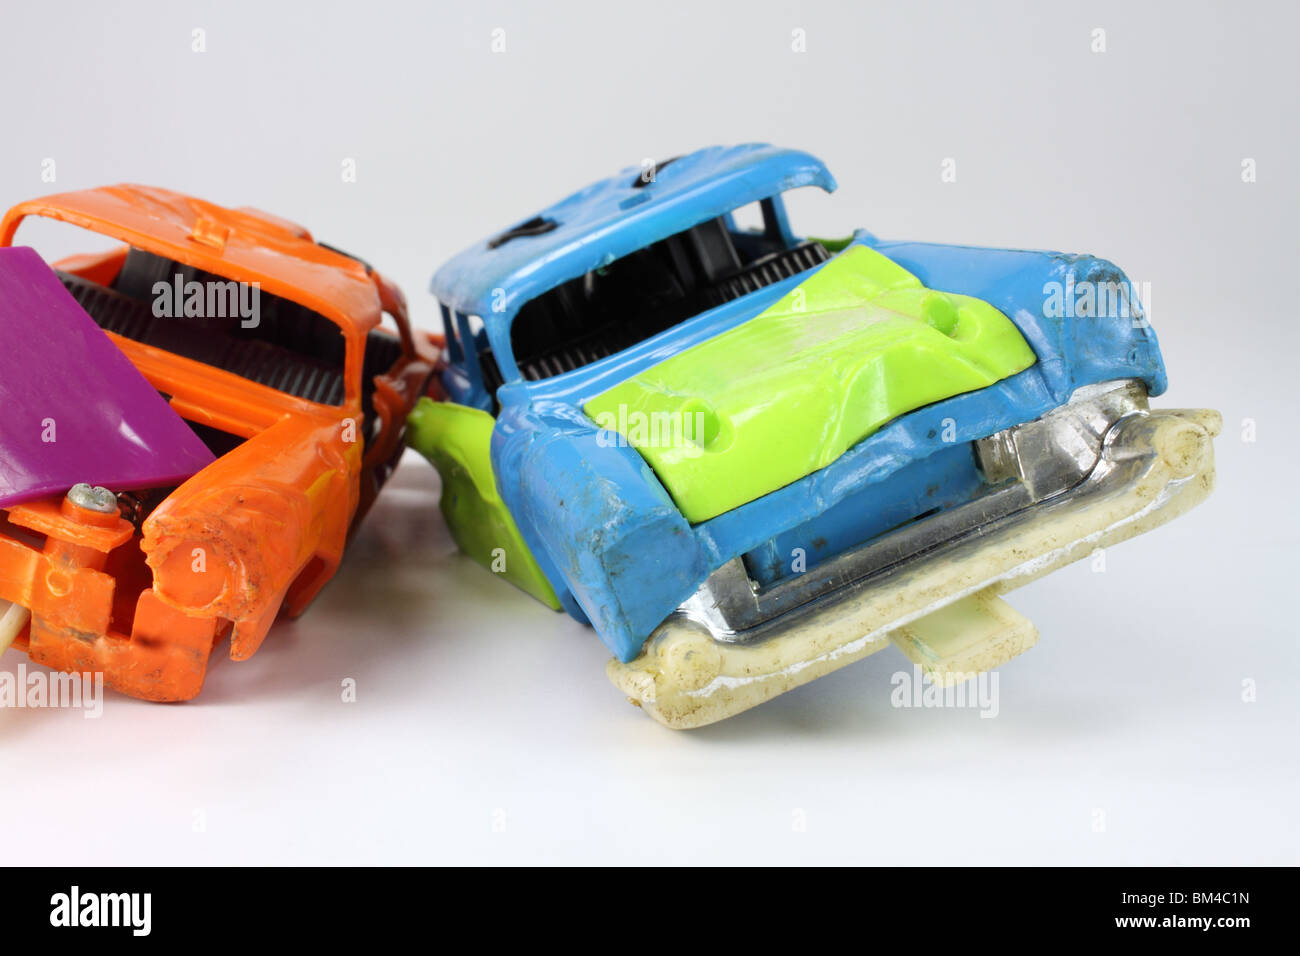 Junk toy cars Stock Photo